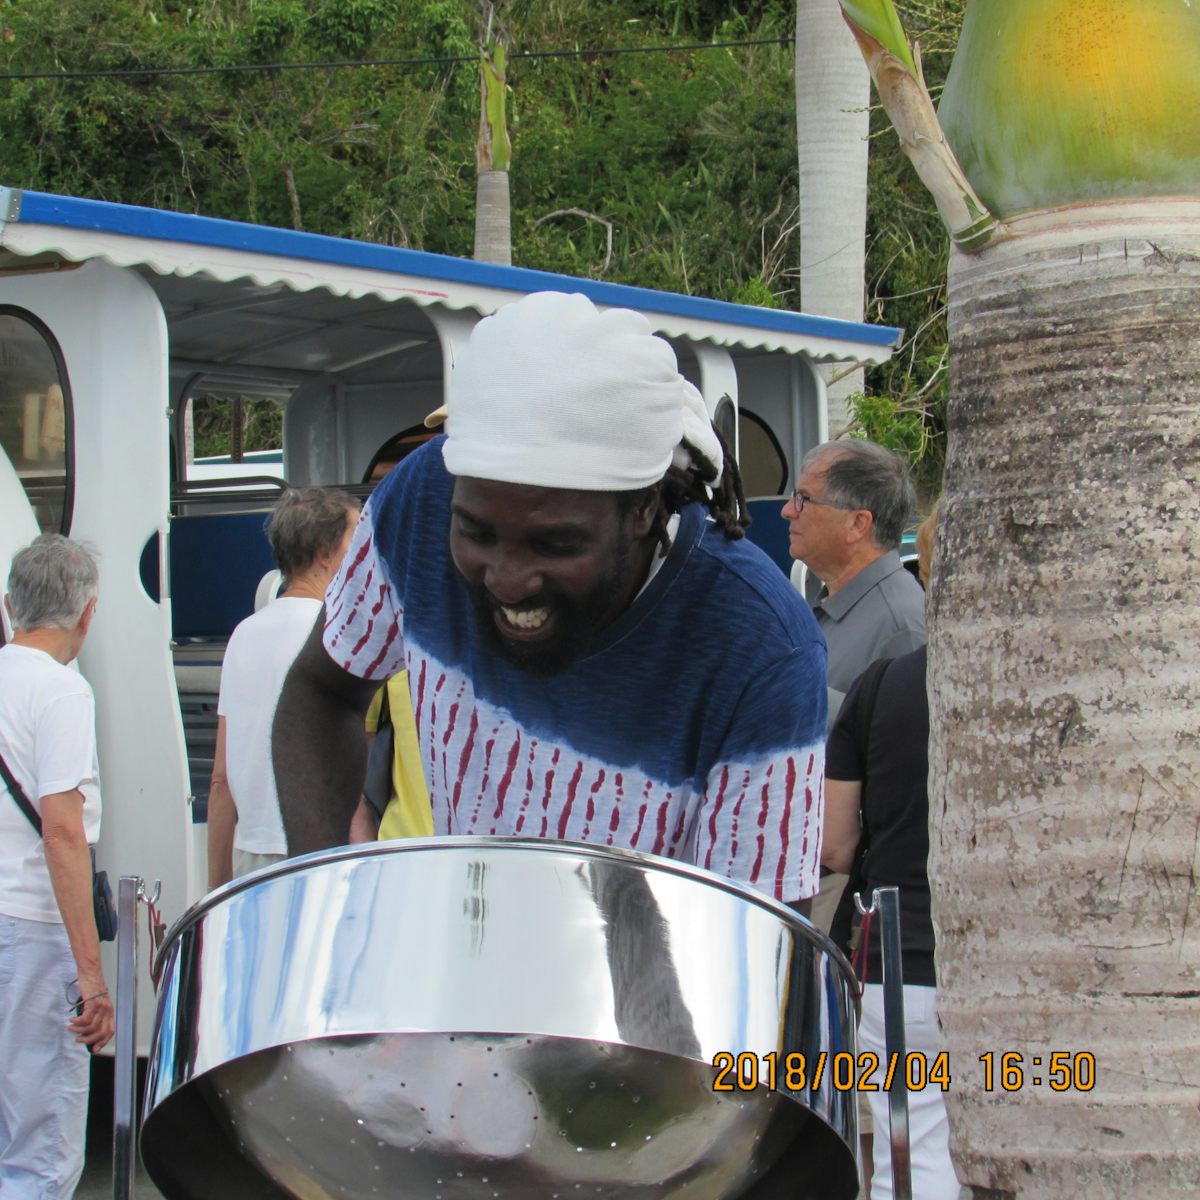 This man could make his steel drum 'sing' Amazing Grace.  I should